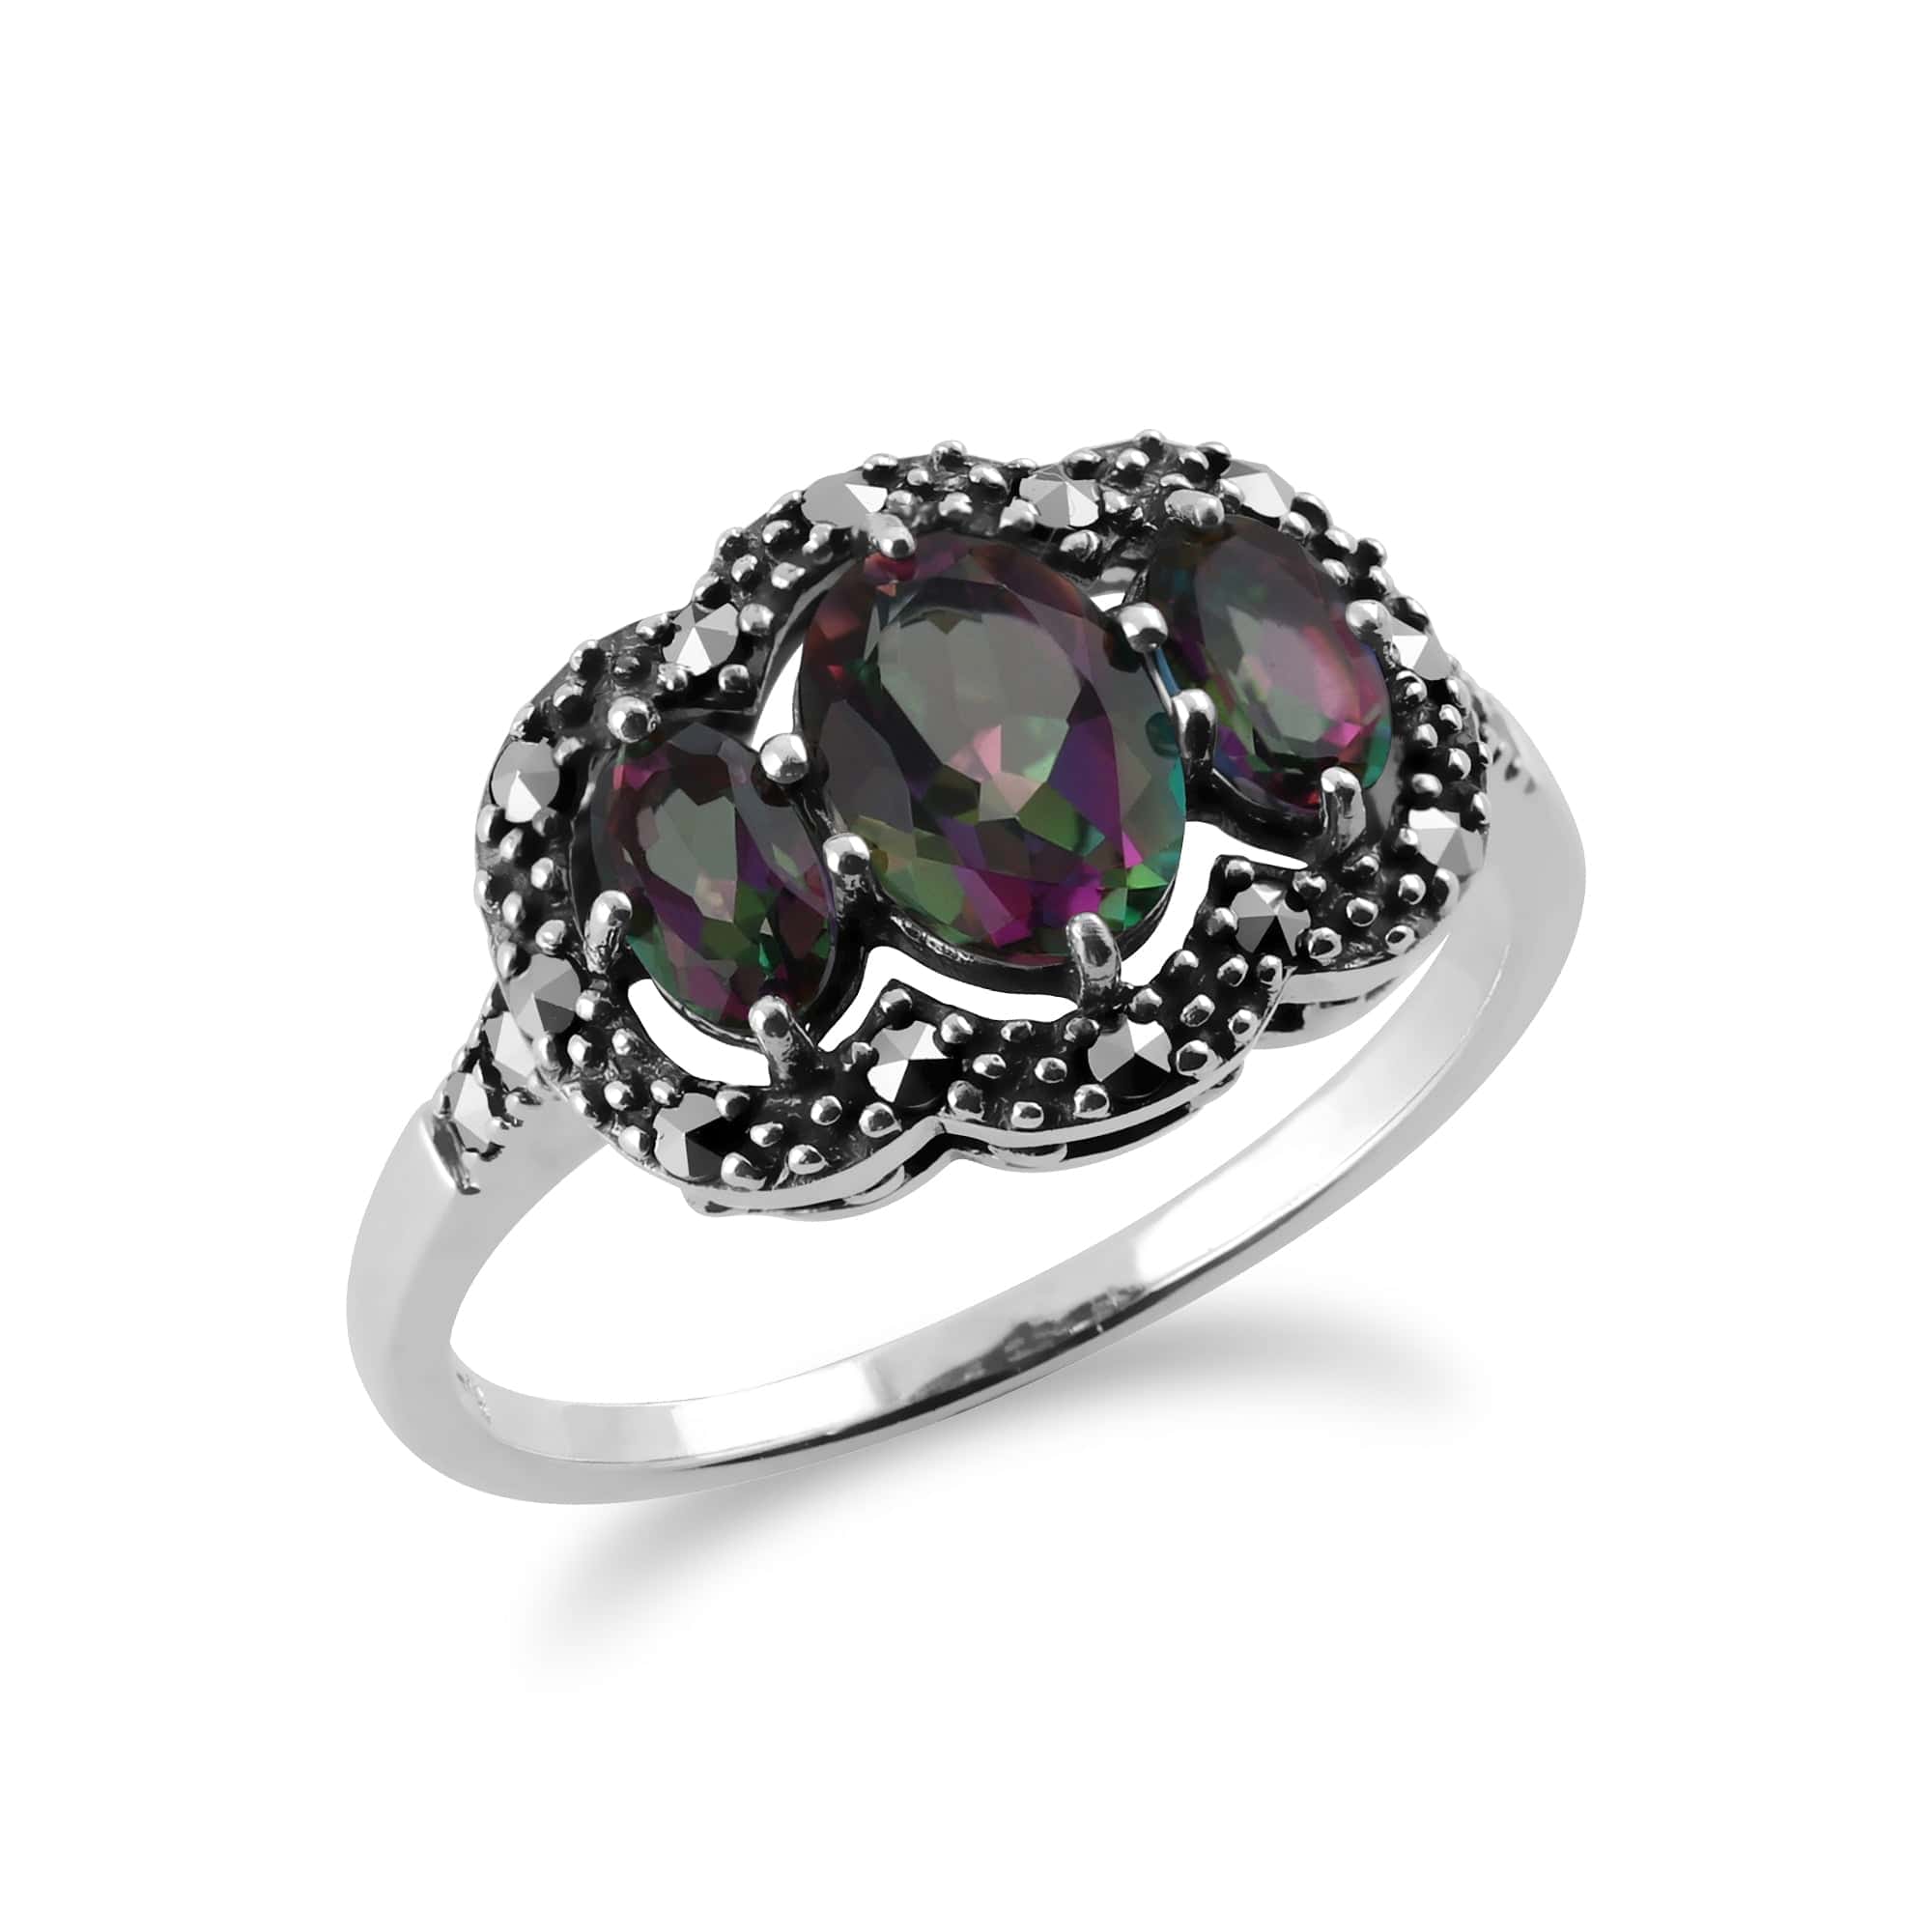 214R483501925 Art Deco Style Oval Mystic Topaz & Marcasite Three Stone Ring In Sterling Silver 2